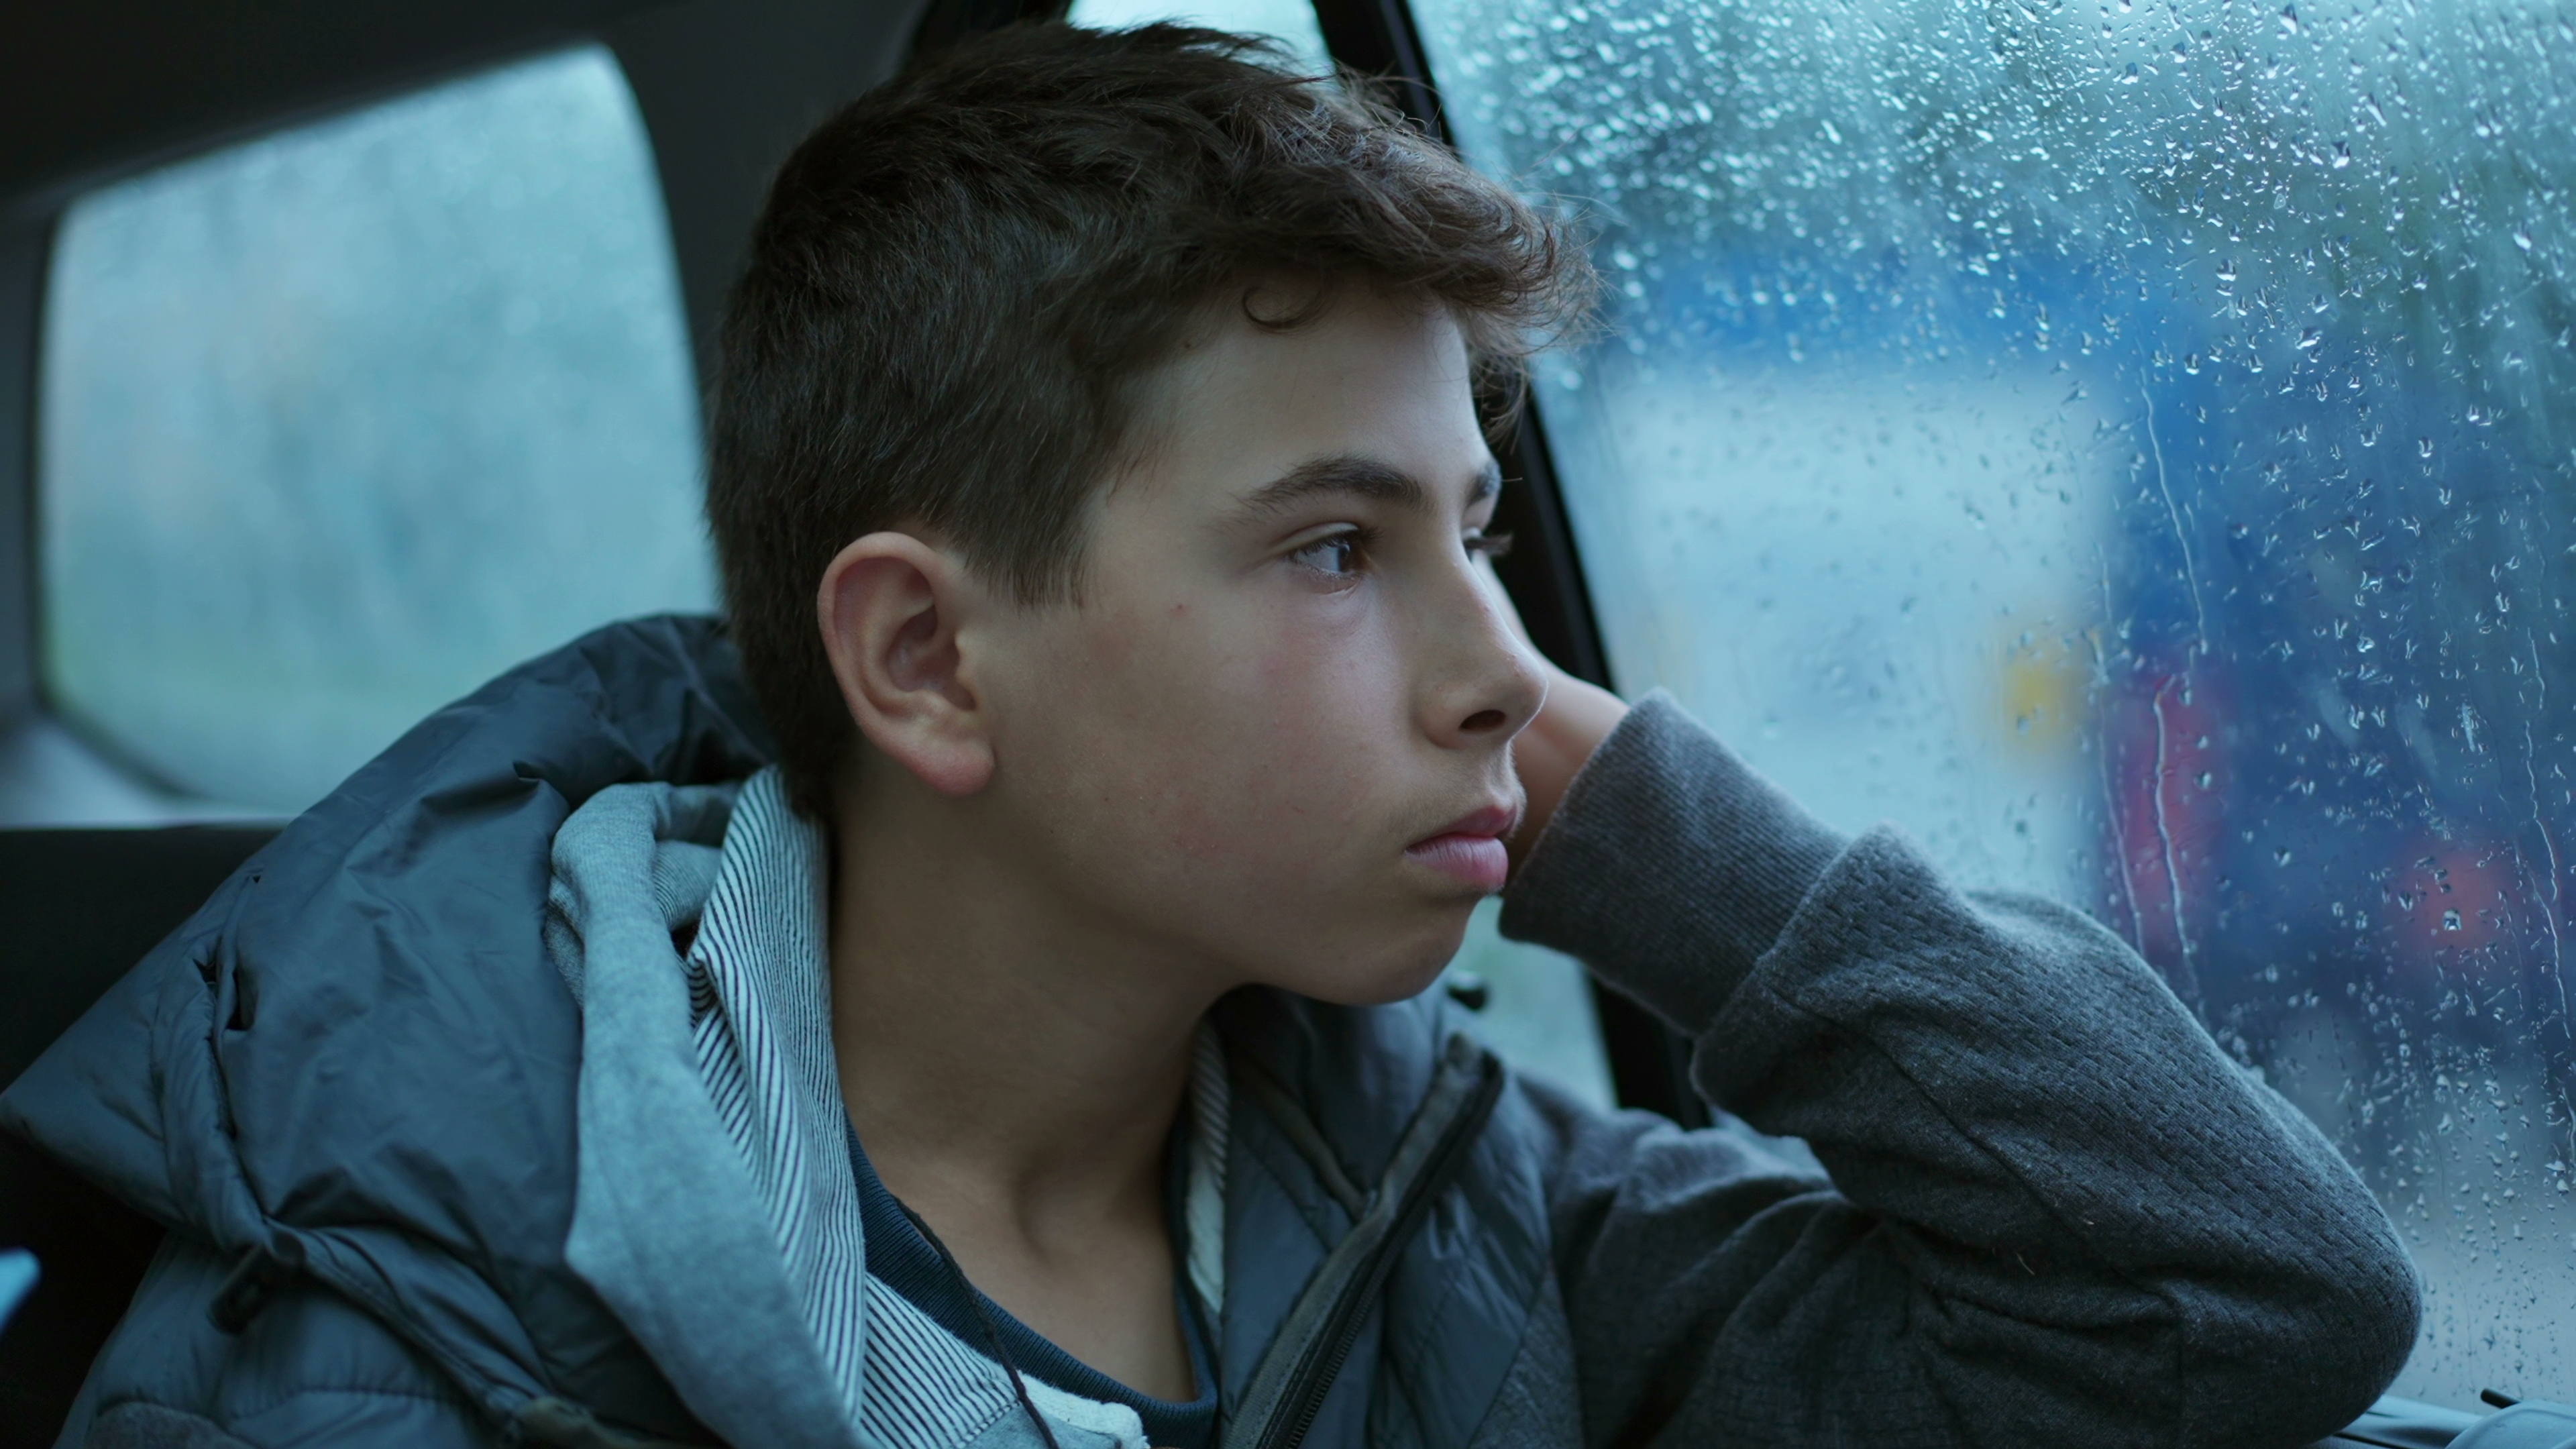 Young boy seated in car backseat staring at glass window | Source: Shutterstock.com